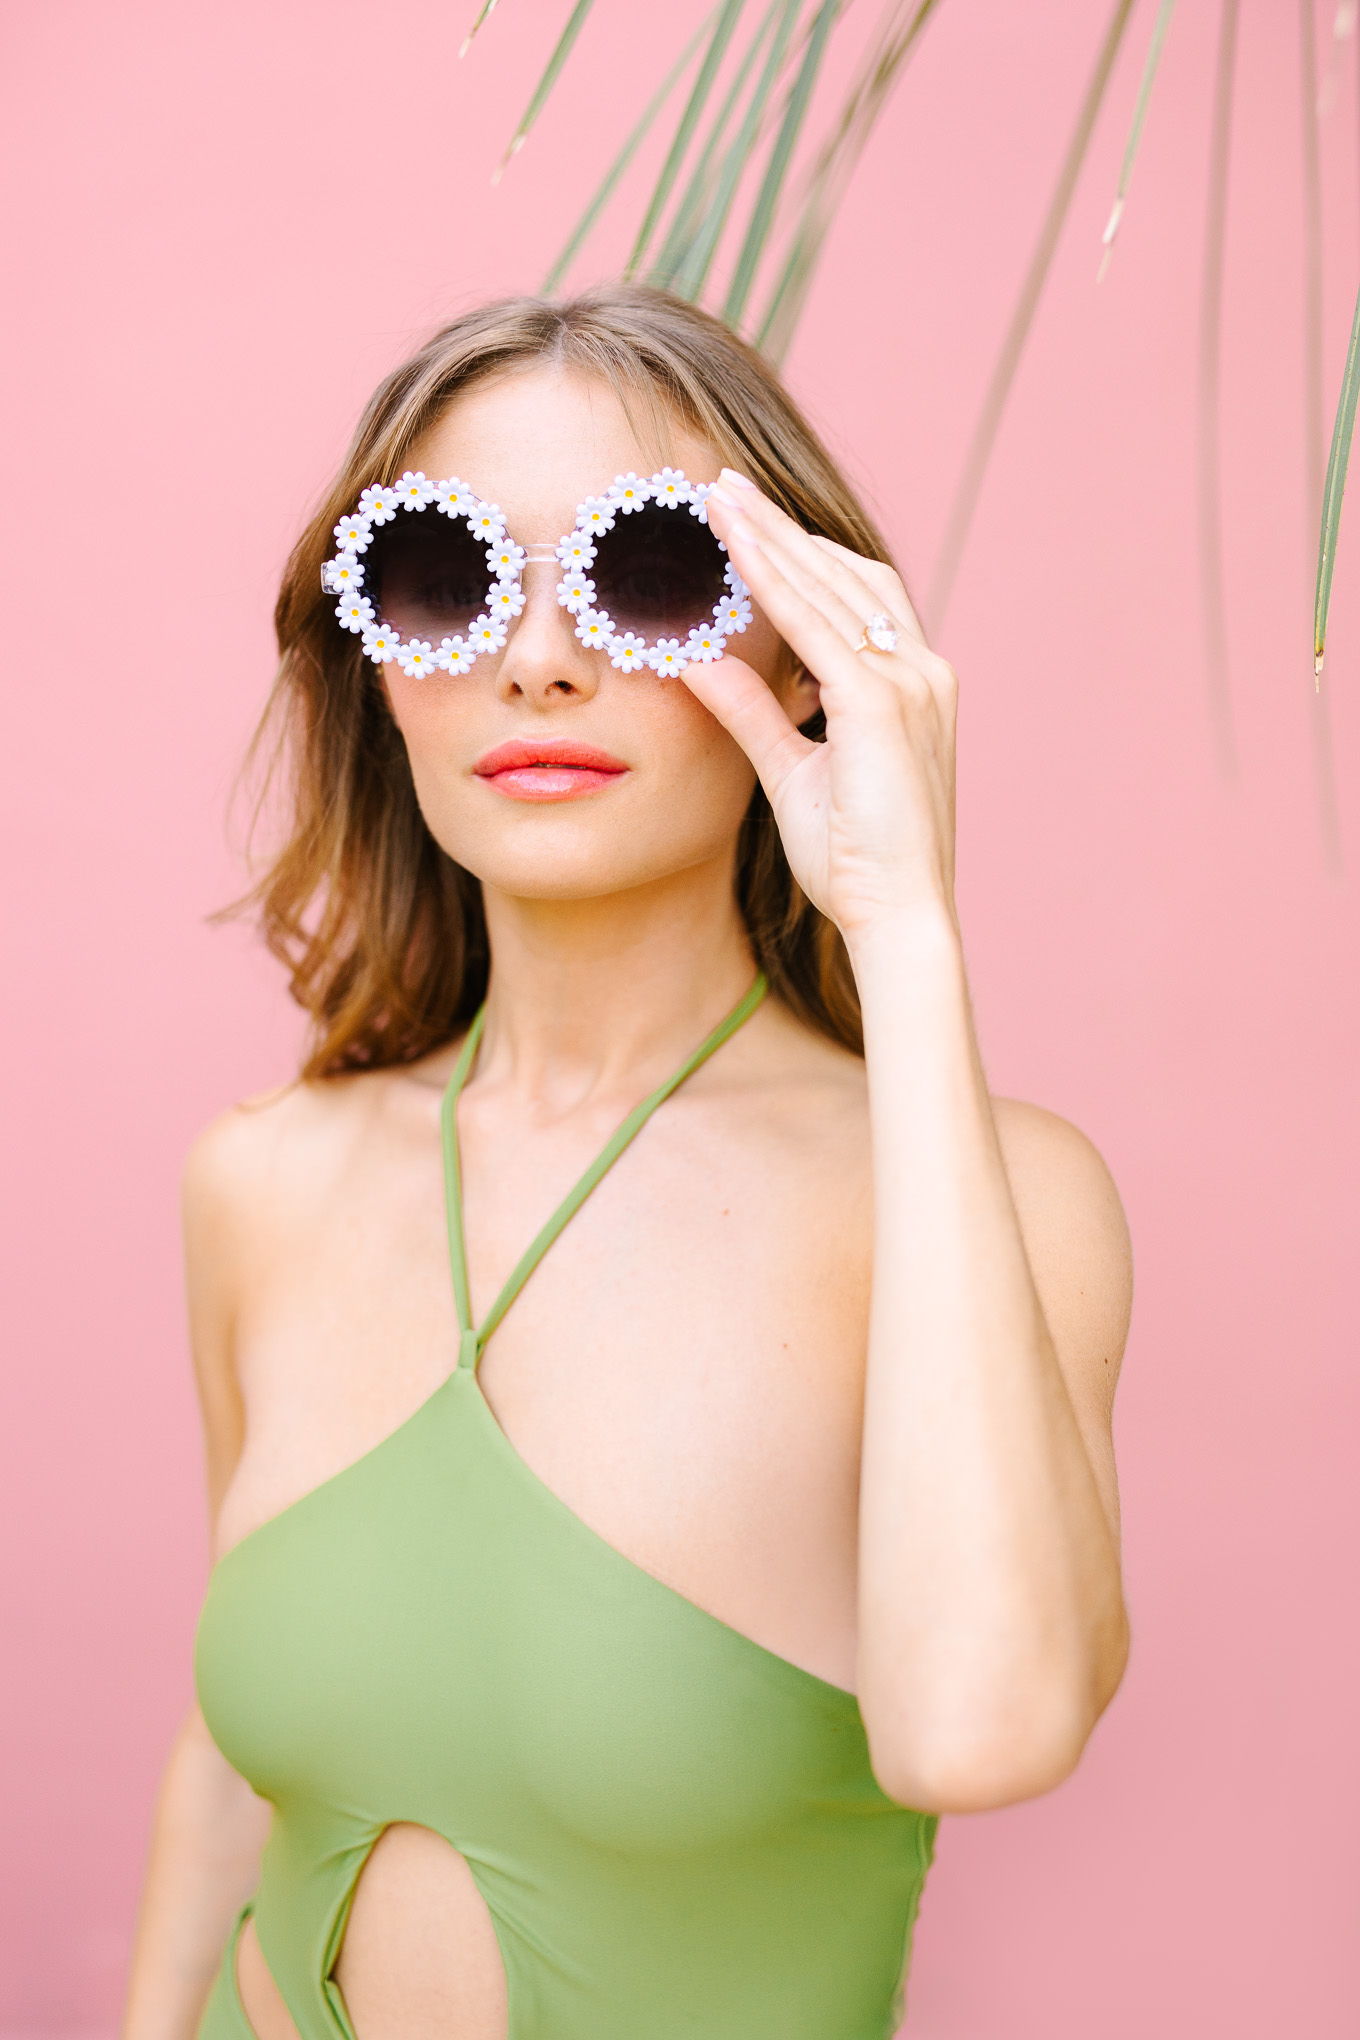 Flower cutout Cult Gaia bathing suit and Elton John flower sunglasses | Kindred Presets x Mary Costa Photography Sands Hotel Ad Campaign | Colorful Palm Springs wedding photography | #palmspringsphotographer #lightroompresets #sandshotel #pinkhotel   Source: Mary Costa Photography | Los Angeles